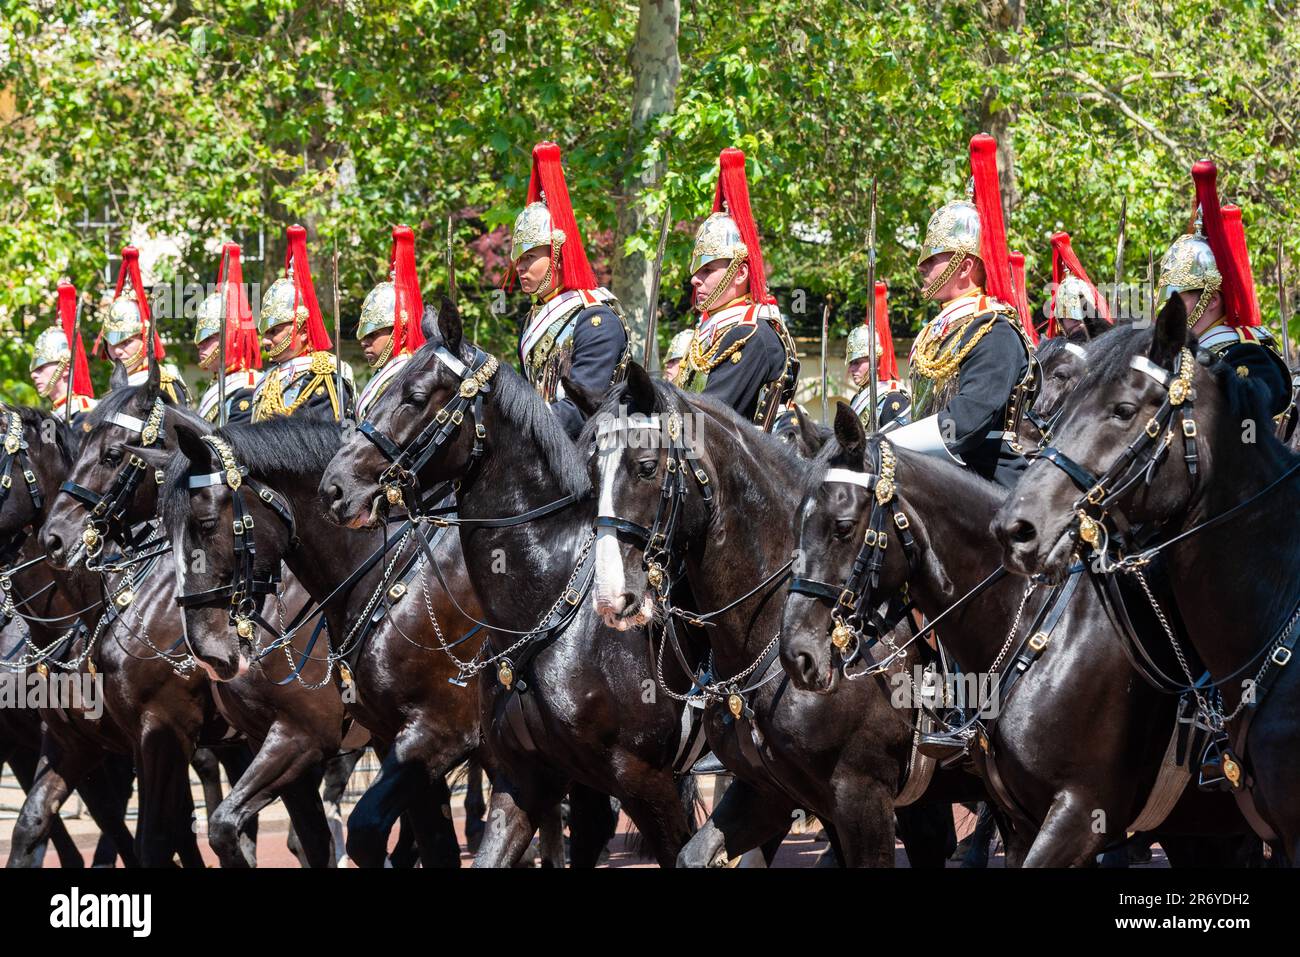 Colonel's review of Trooping the Colour, a final evaluation of the military parade before the full event takes place next week. Blues & Royals riders Stock Photo